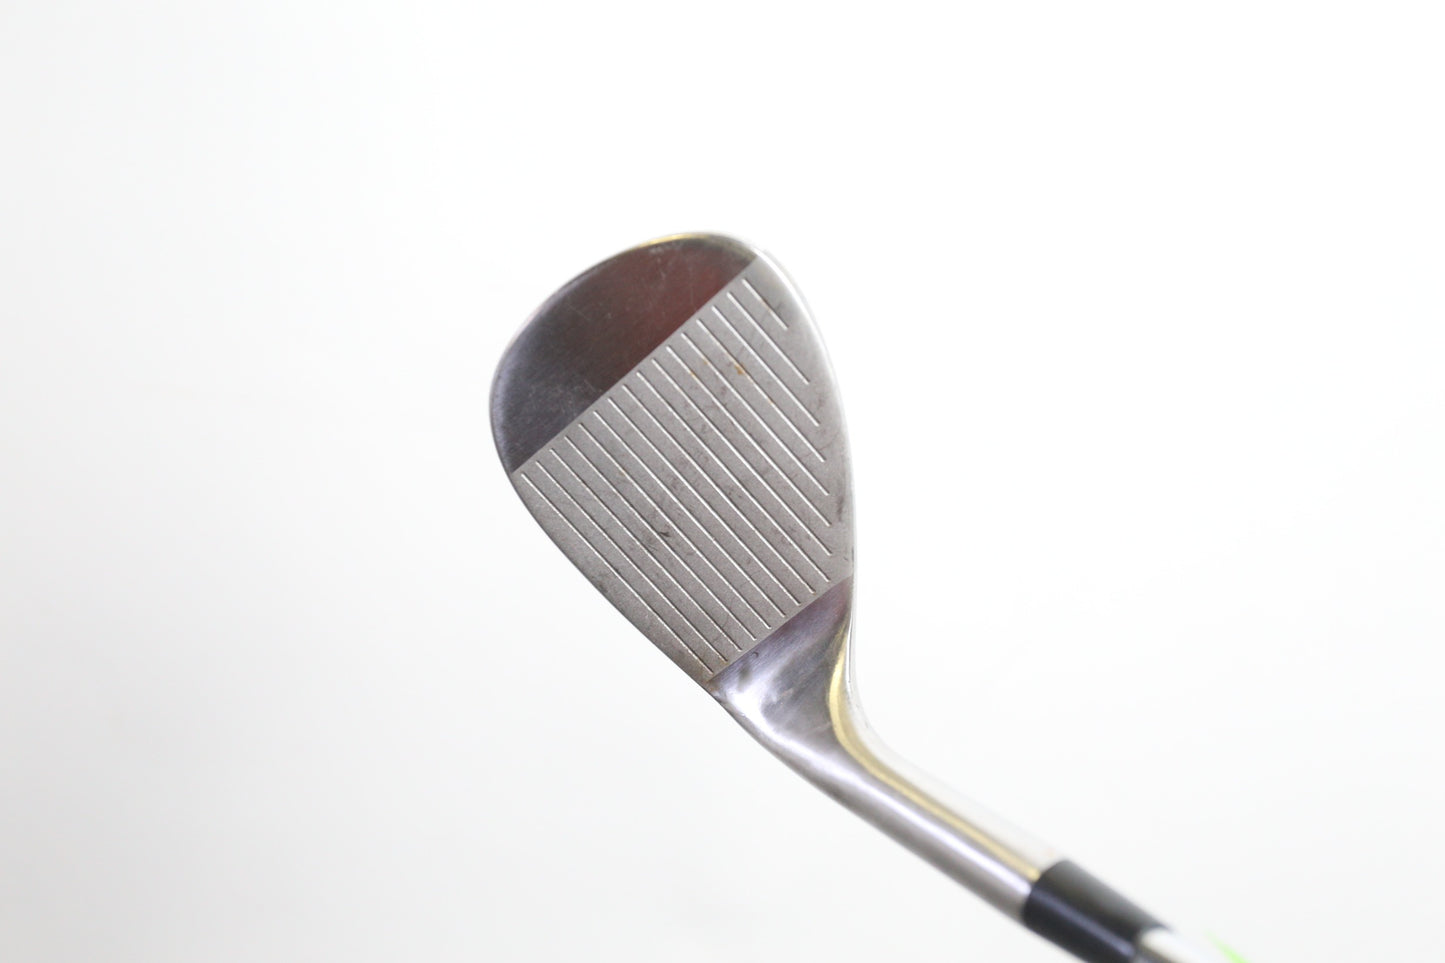 Used Tour Edge Hot Launch HL3 Super Spin Lob Wedge - Right-Handed - 60 Degrees - Stiff Flex